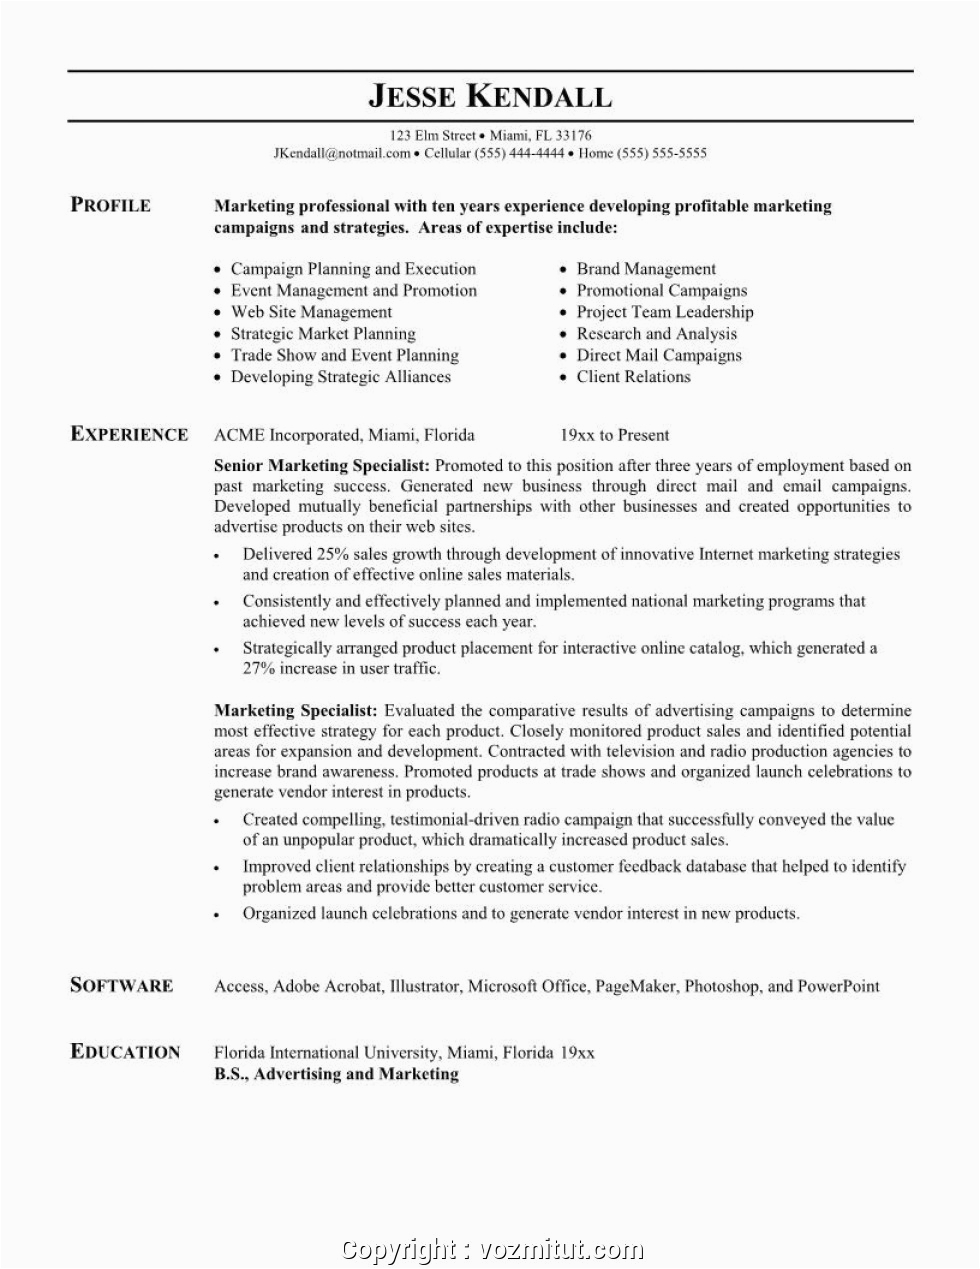 Sample Resume for Experienced Sales and Marketing Professional Best Sample Resume for Experienced Marketing Professional